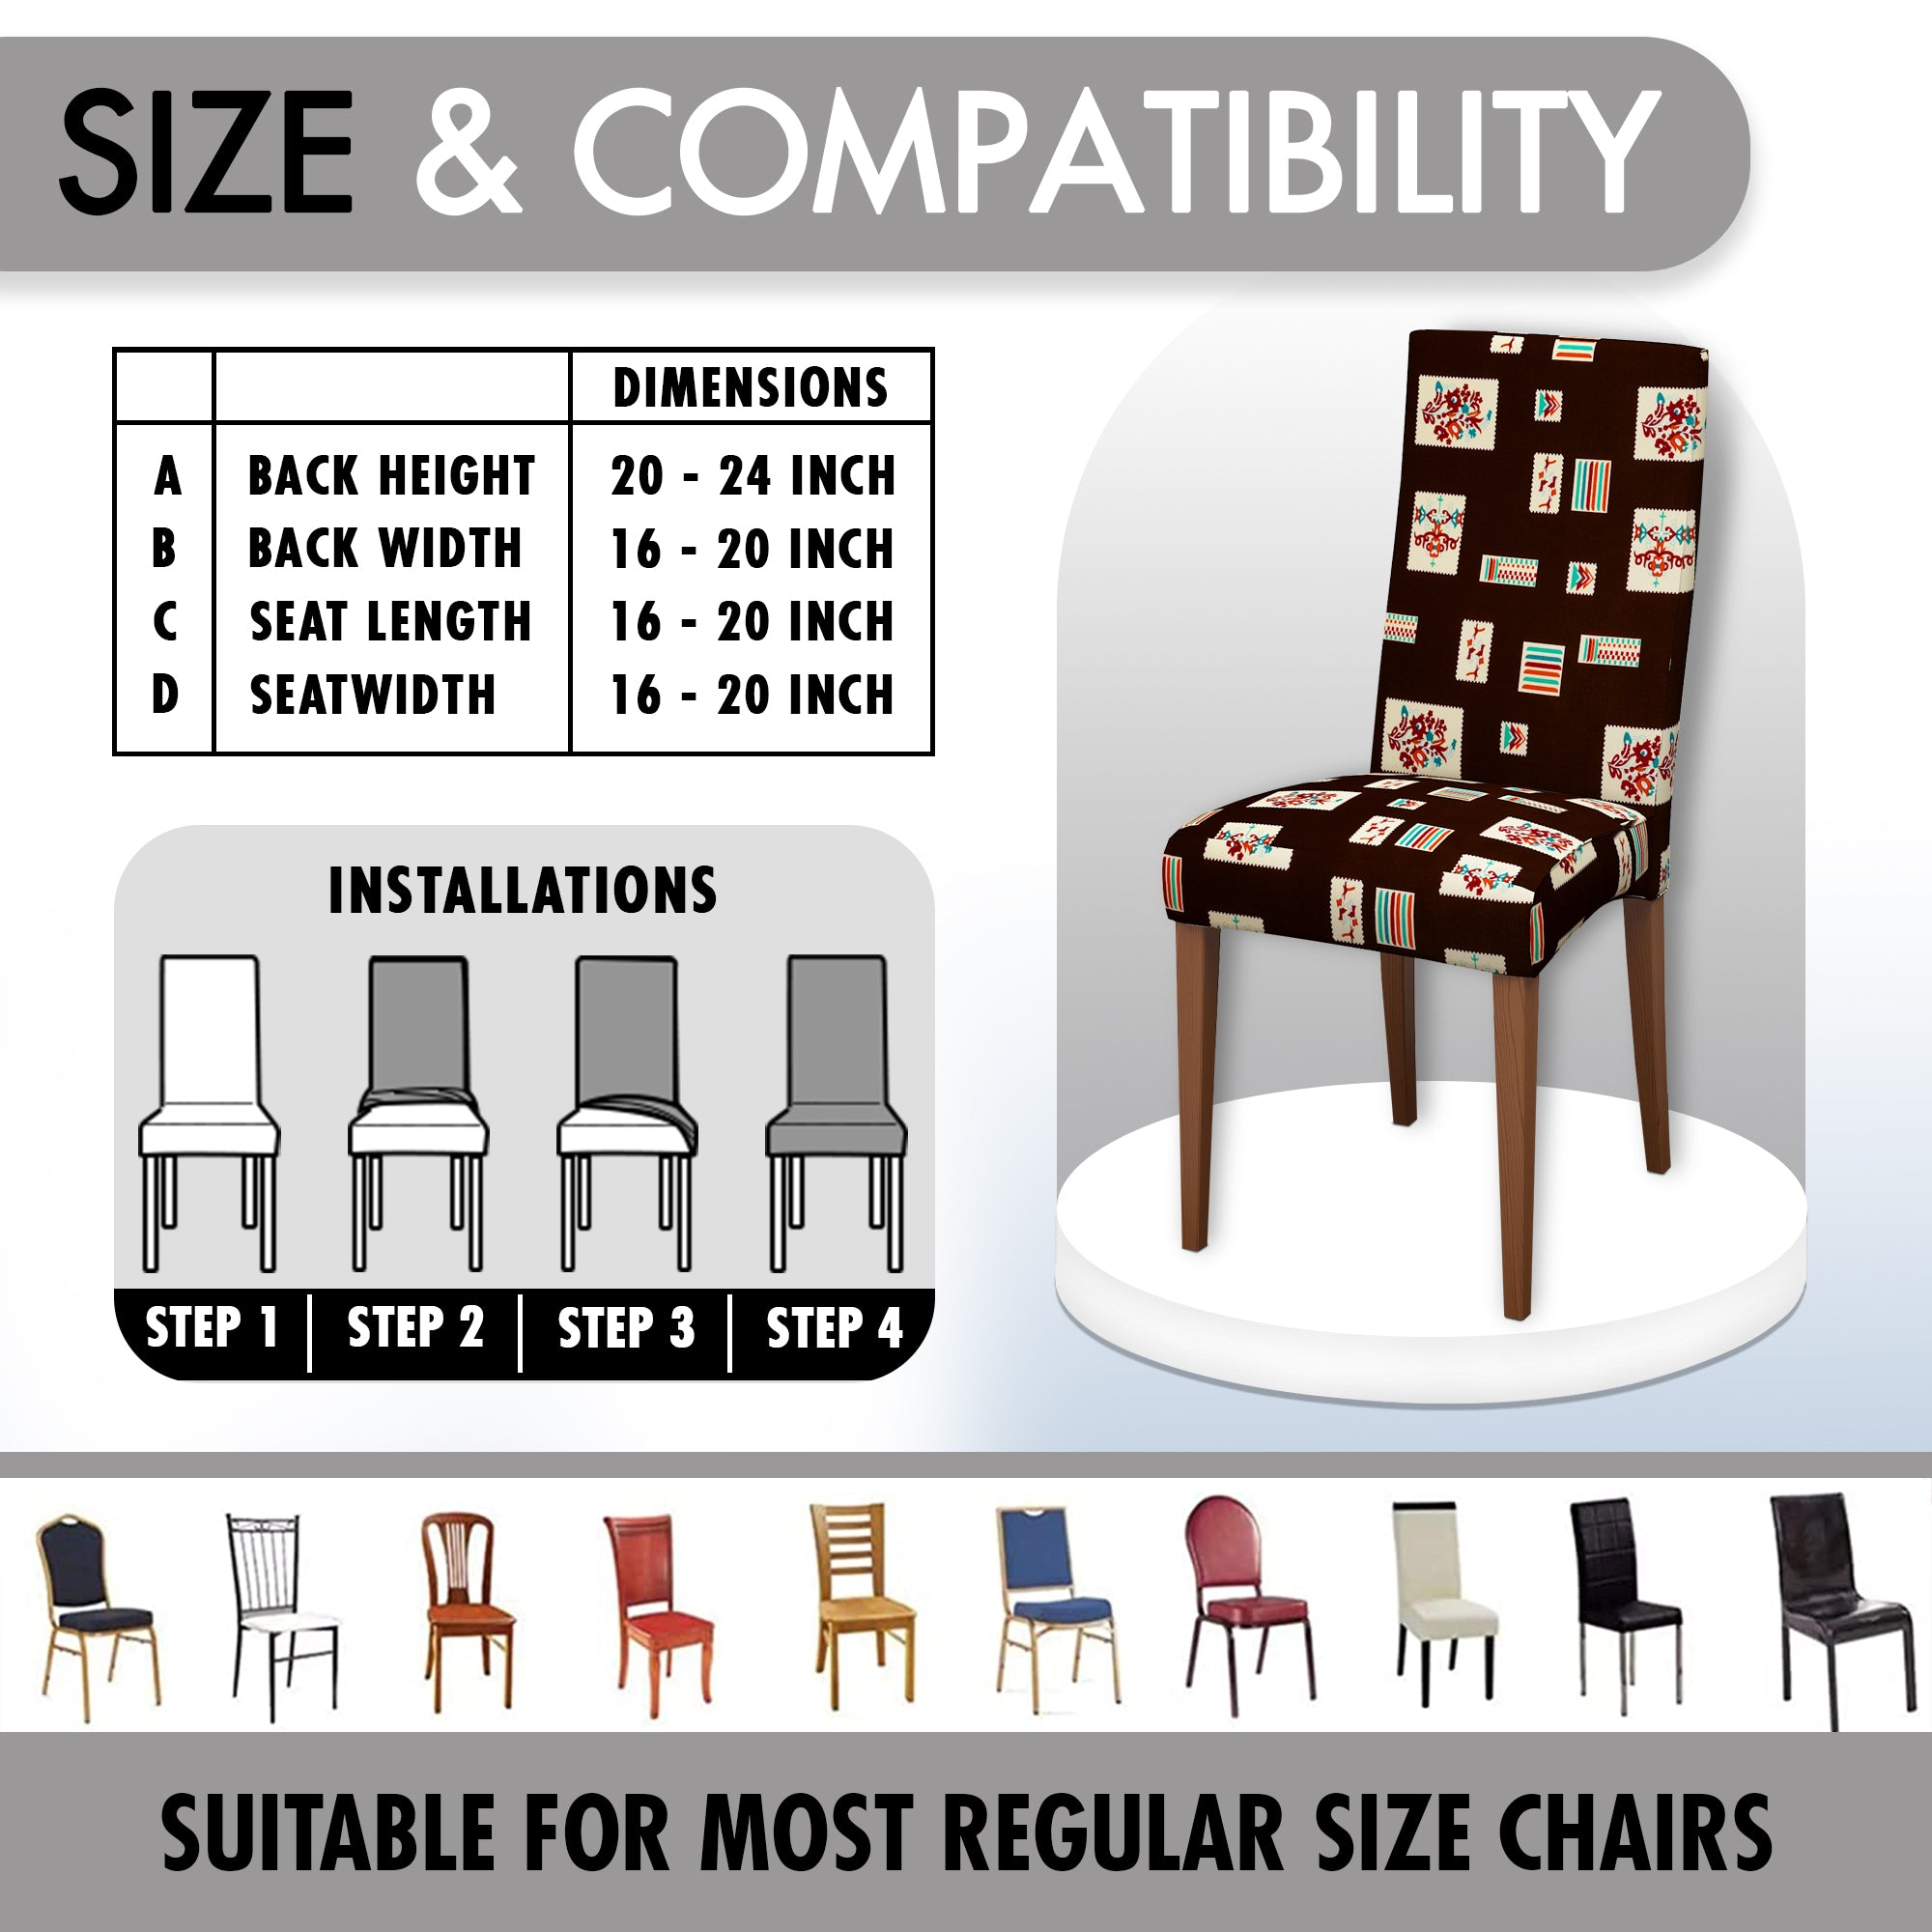 Polyester Spandex Stretchable Printed Chair Cover, MG29